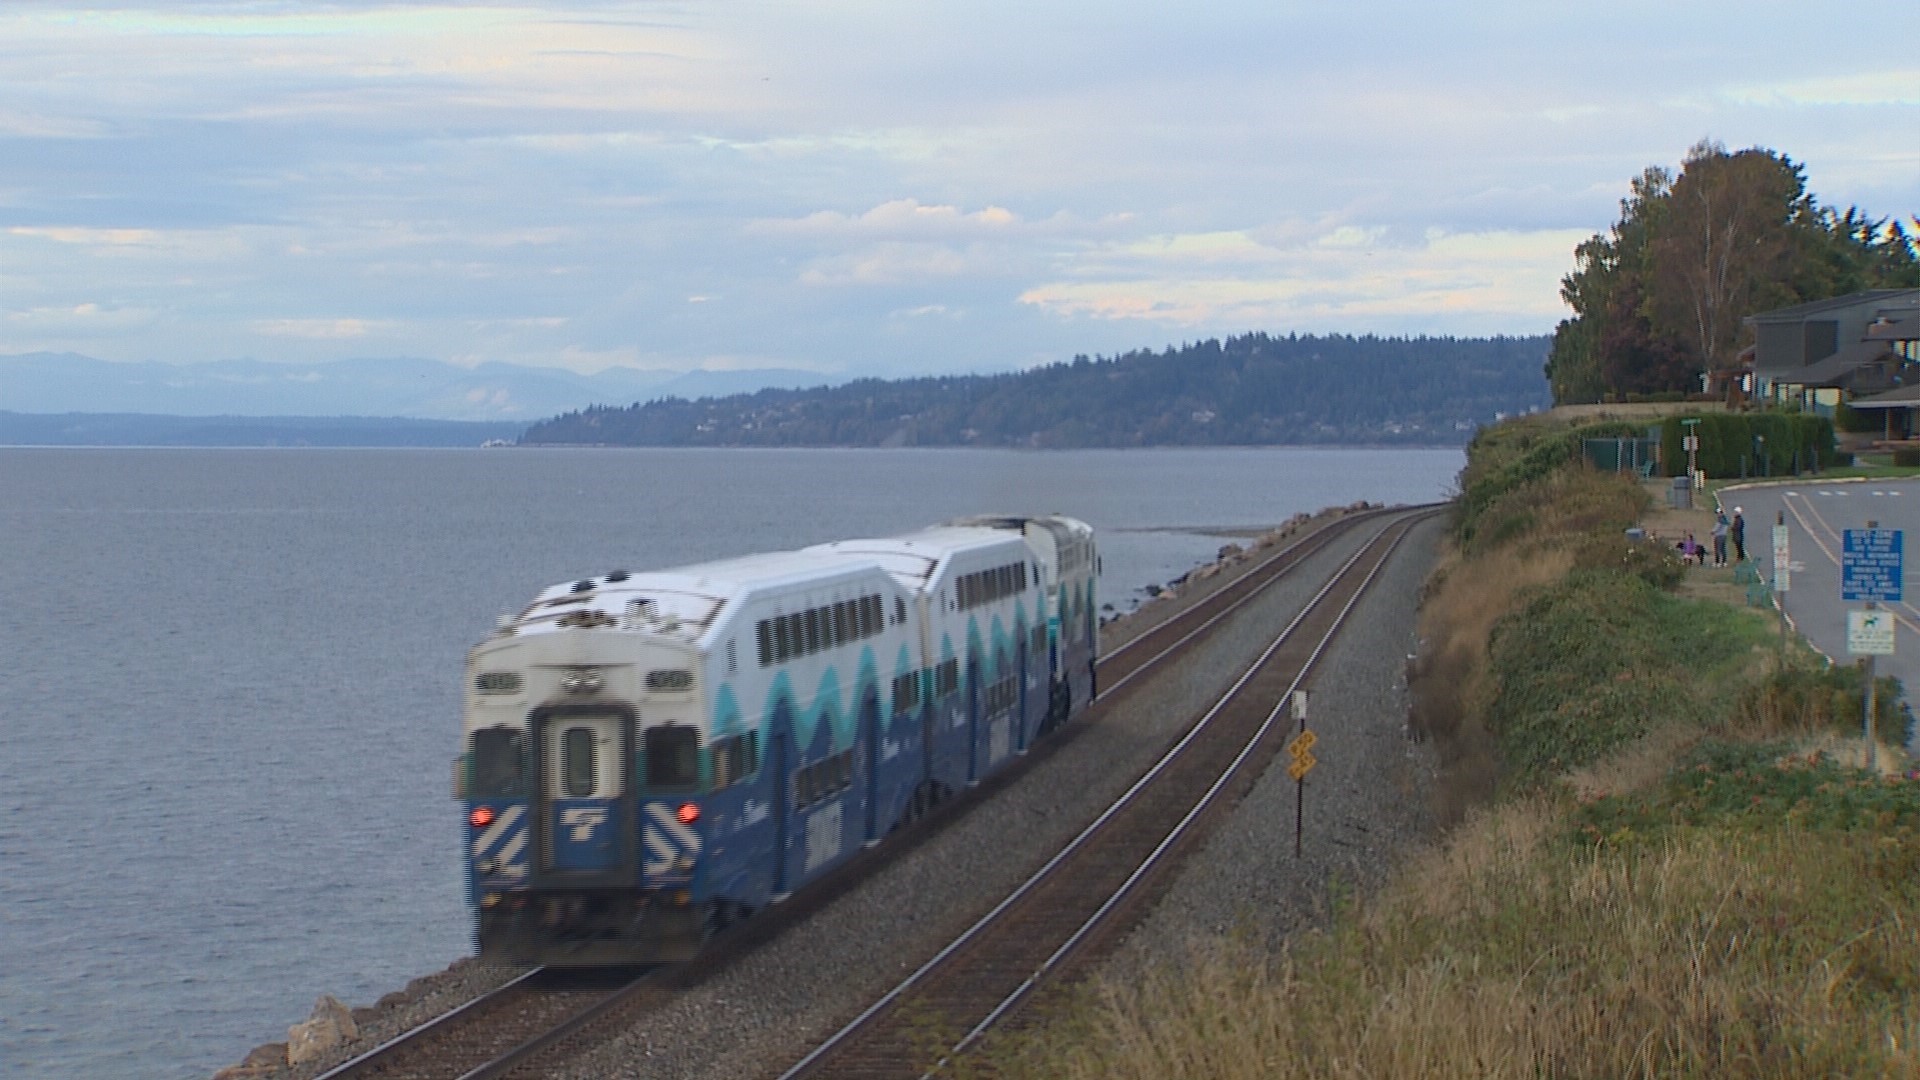 Though it is a big dollar amount and would take time to achieve, Roger Millar says a high-speed rail line could be a better option than adding a lane to I-5